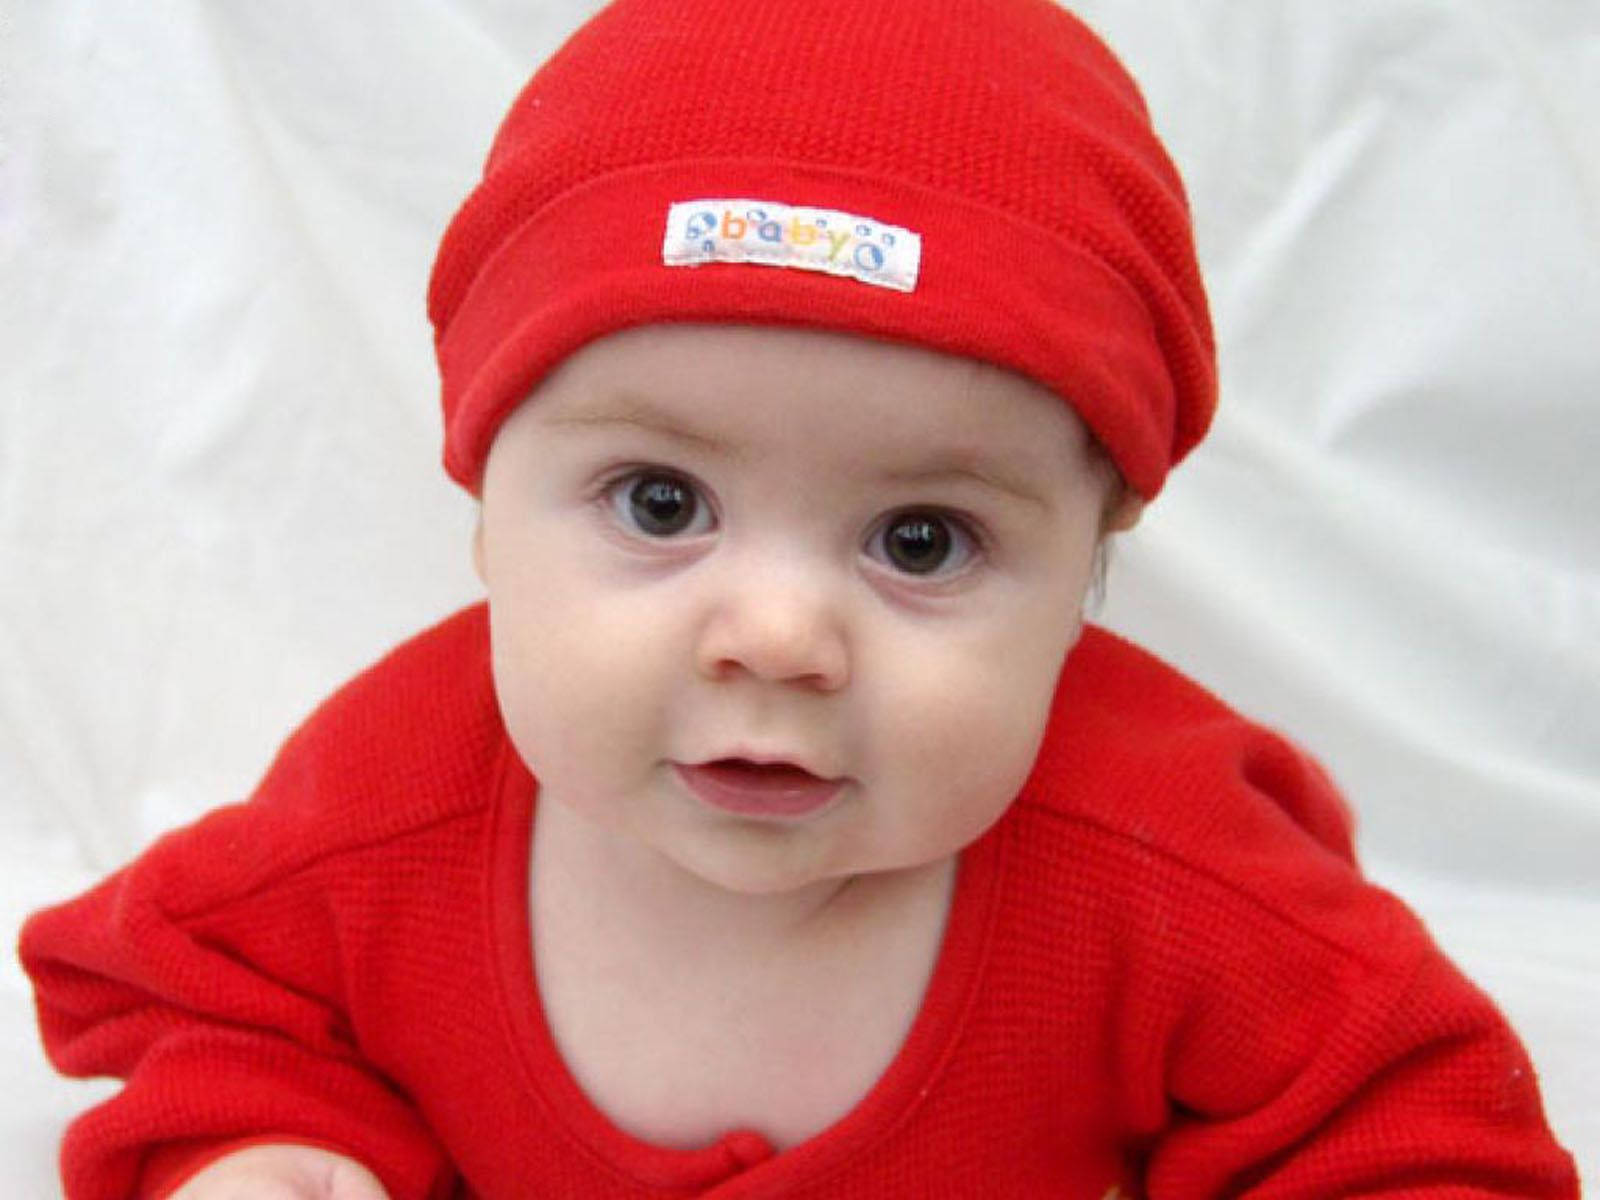 Baby In Red Outfit Is Ready For Playtime Wallpaper